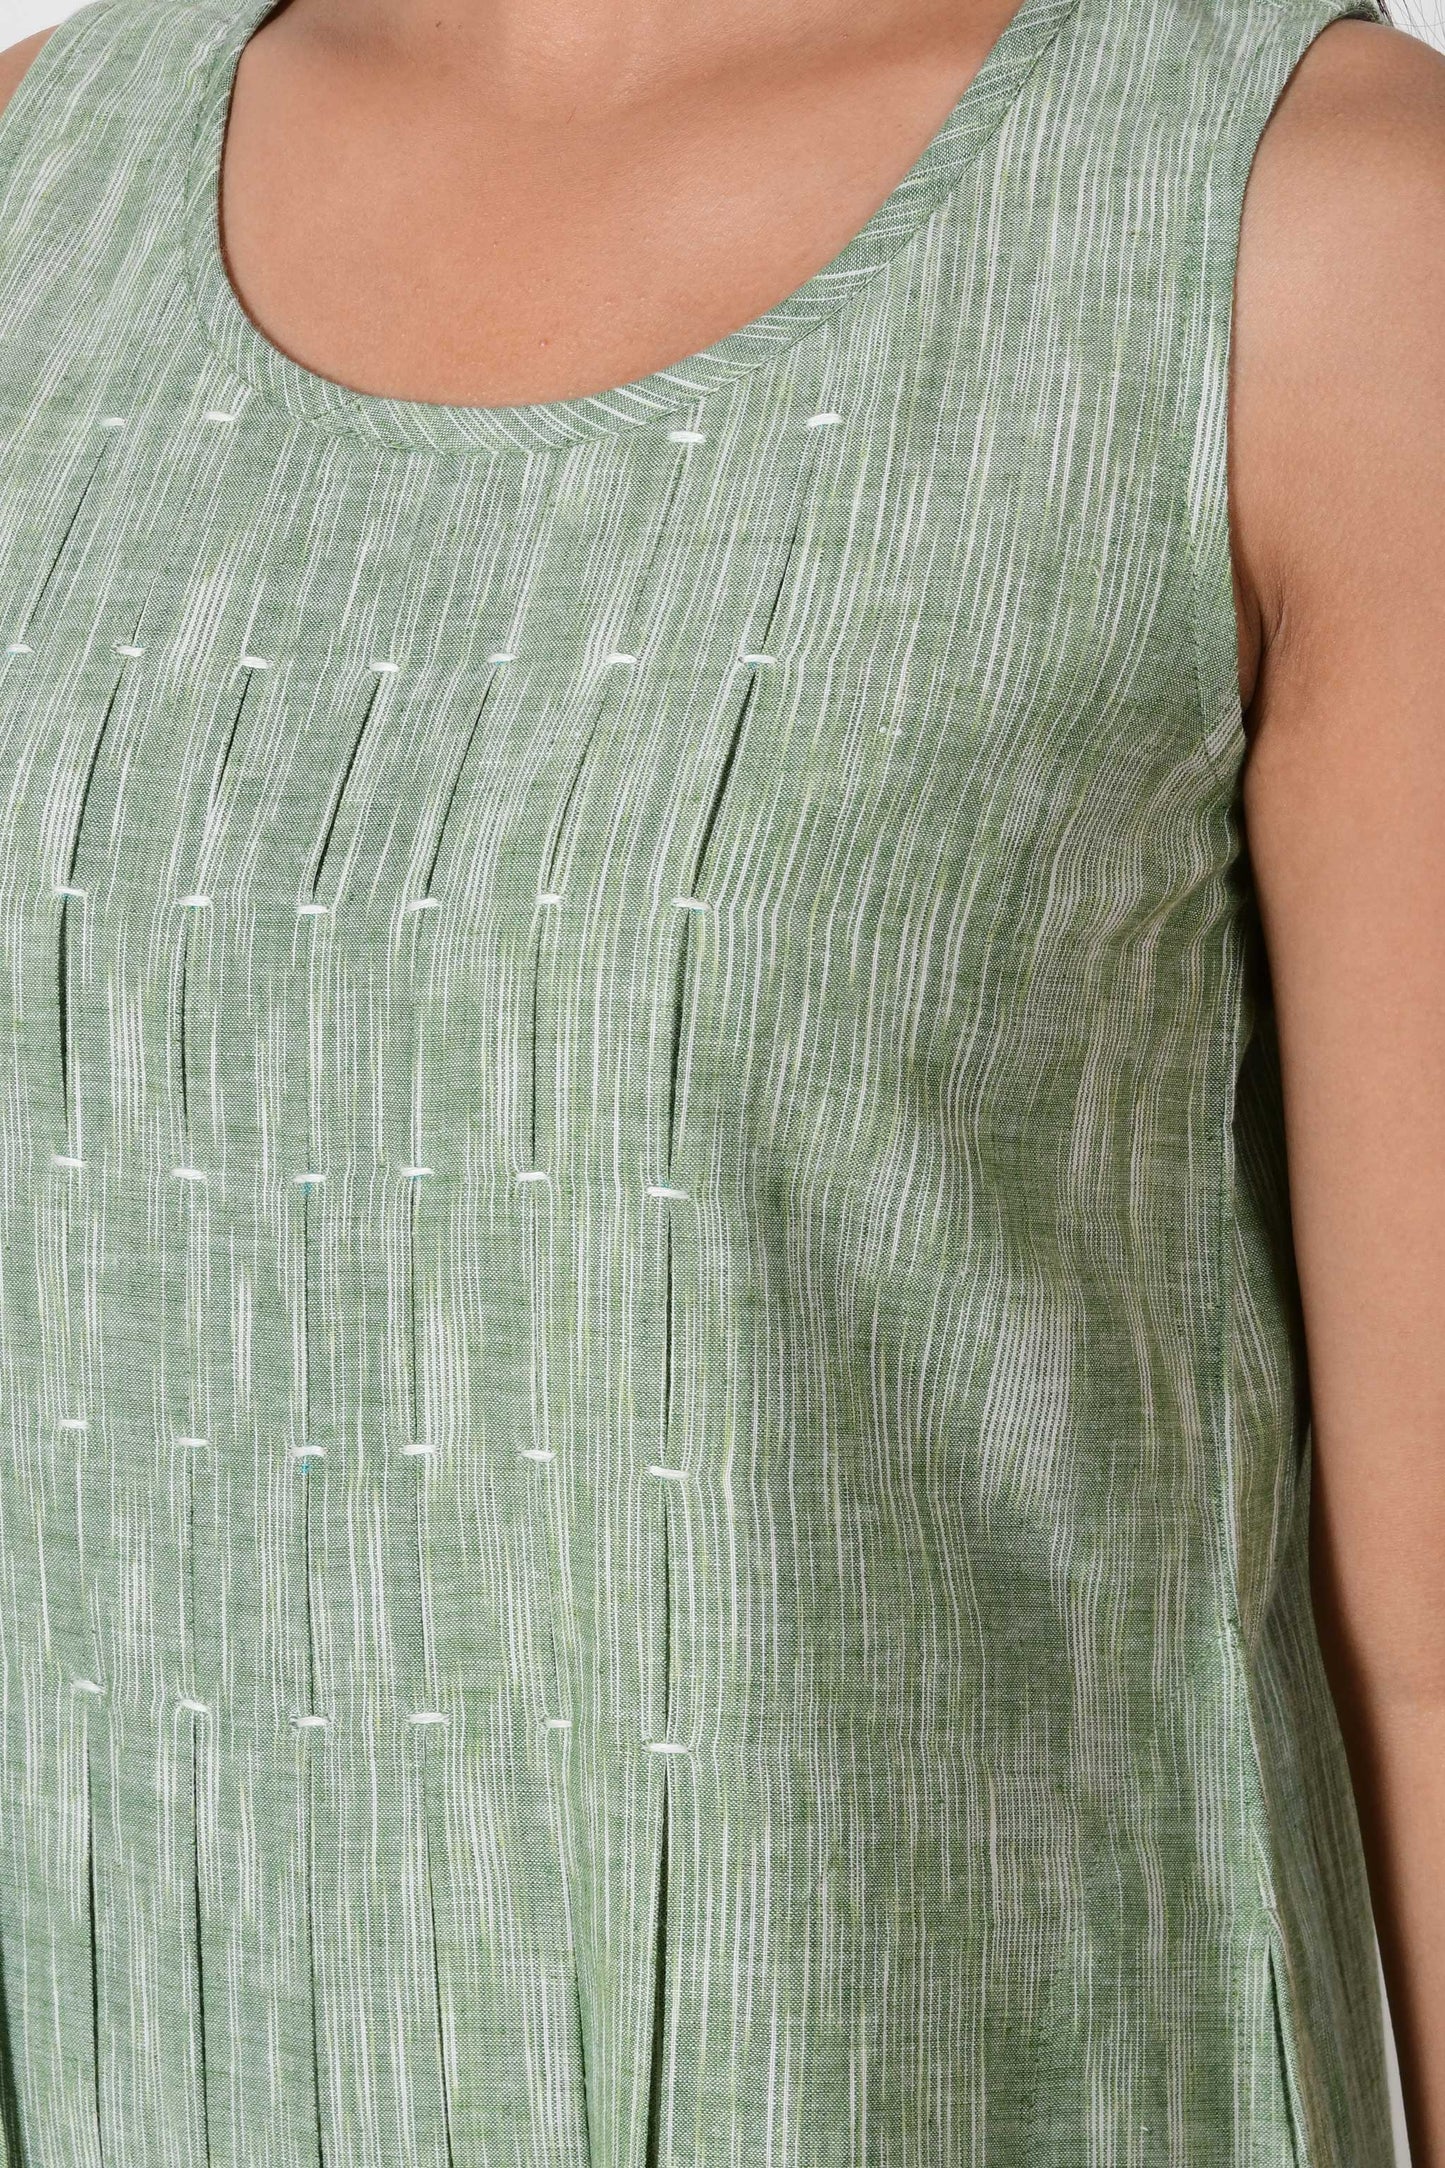 close up of the box pleats on a green textured cotton sleeveless dress.